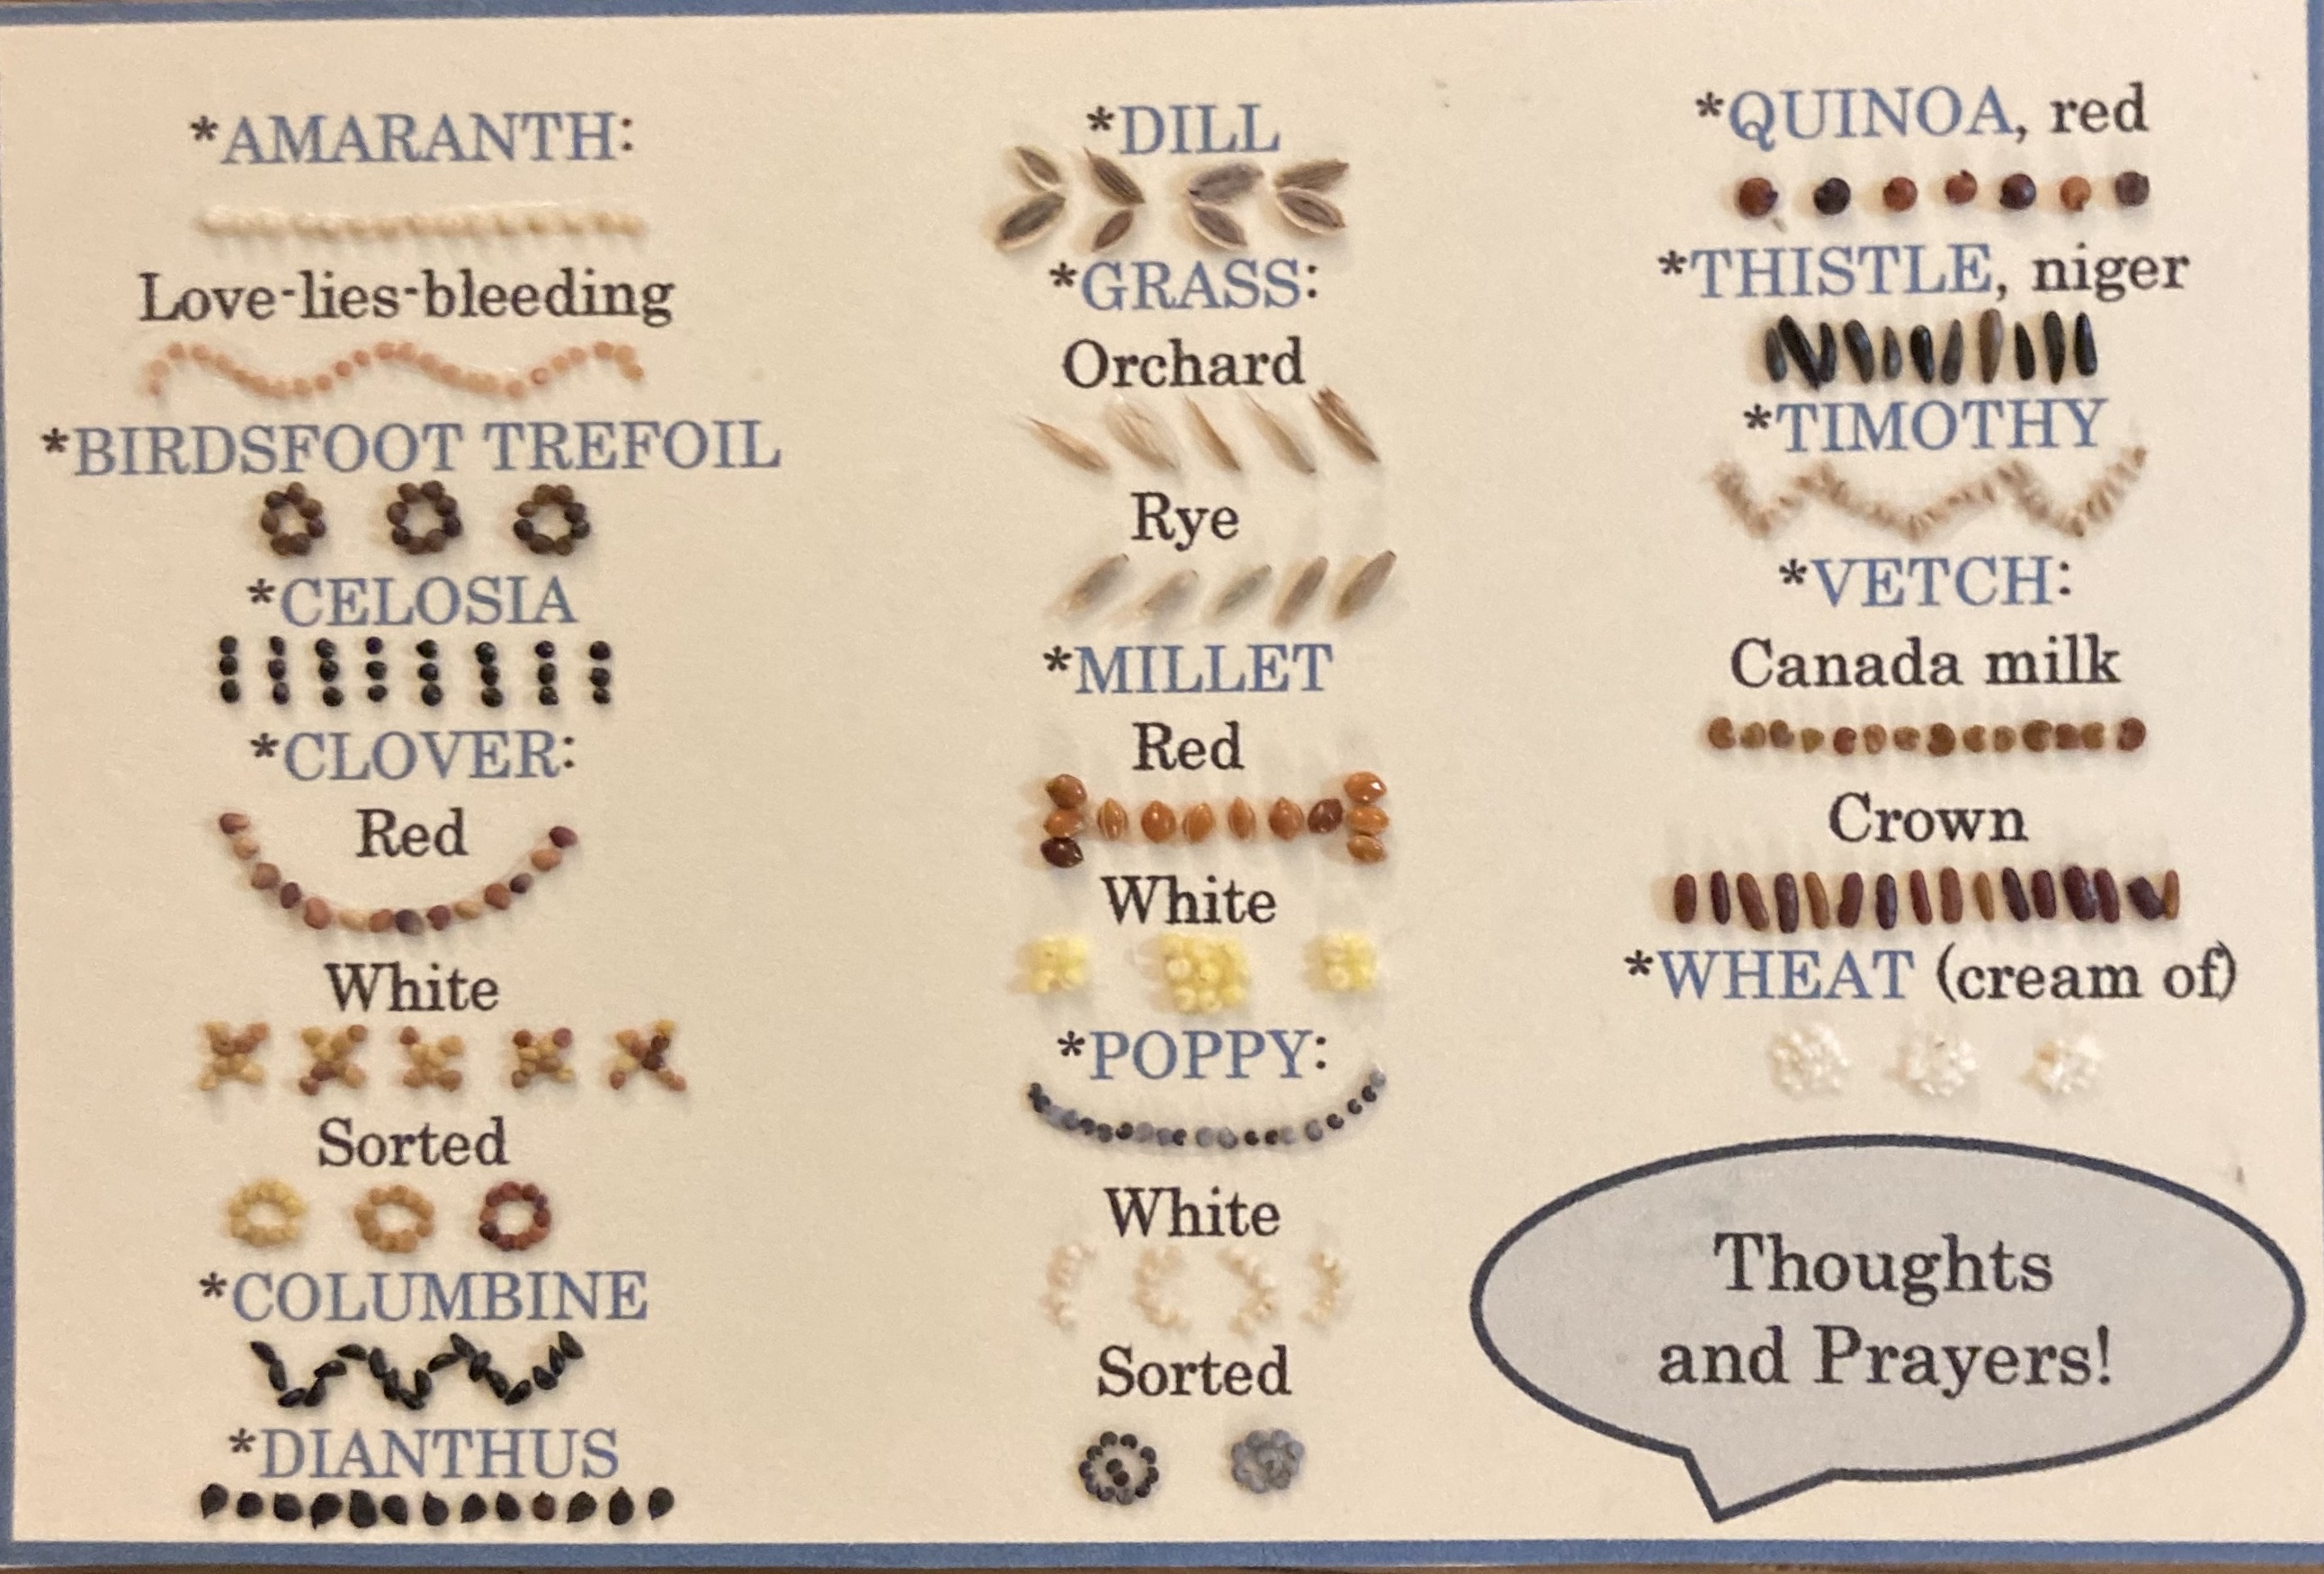 [Laura Melnick Thoughts and Prayers Seed Card image]